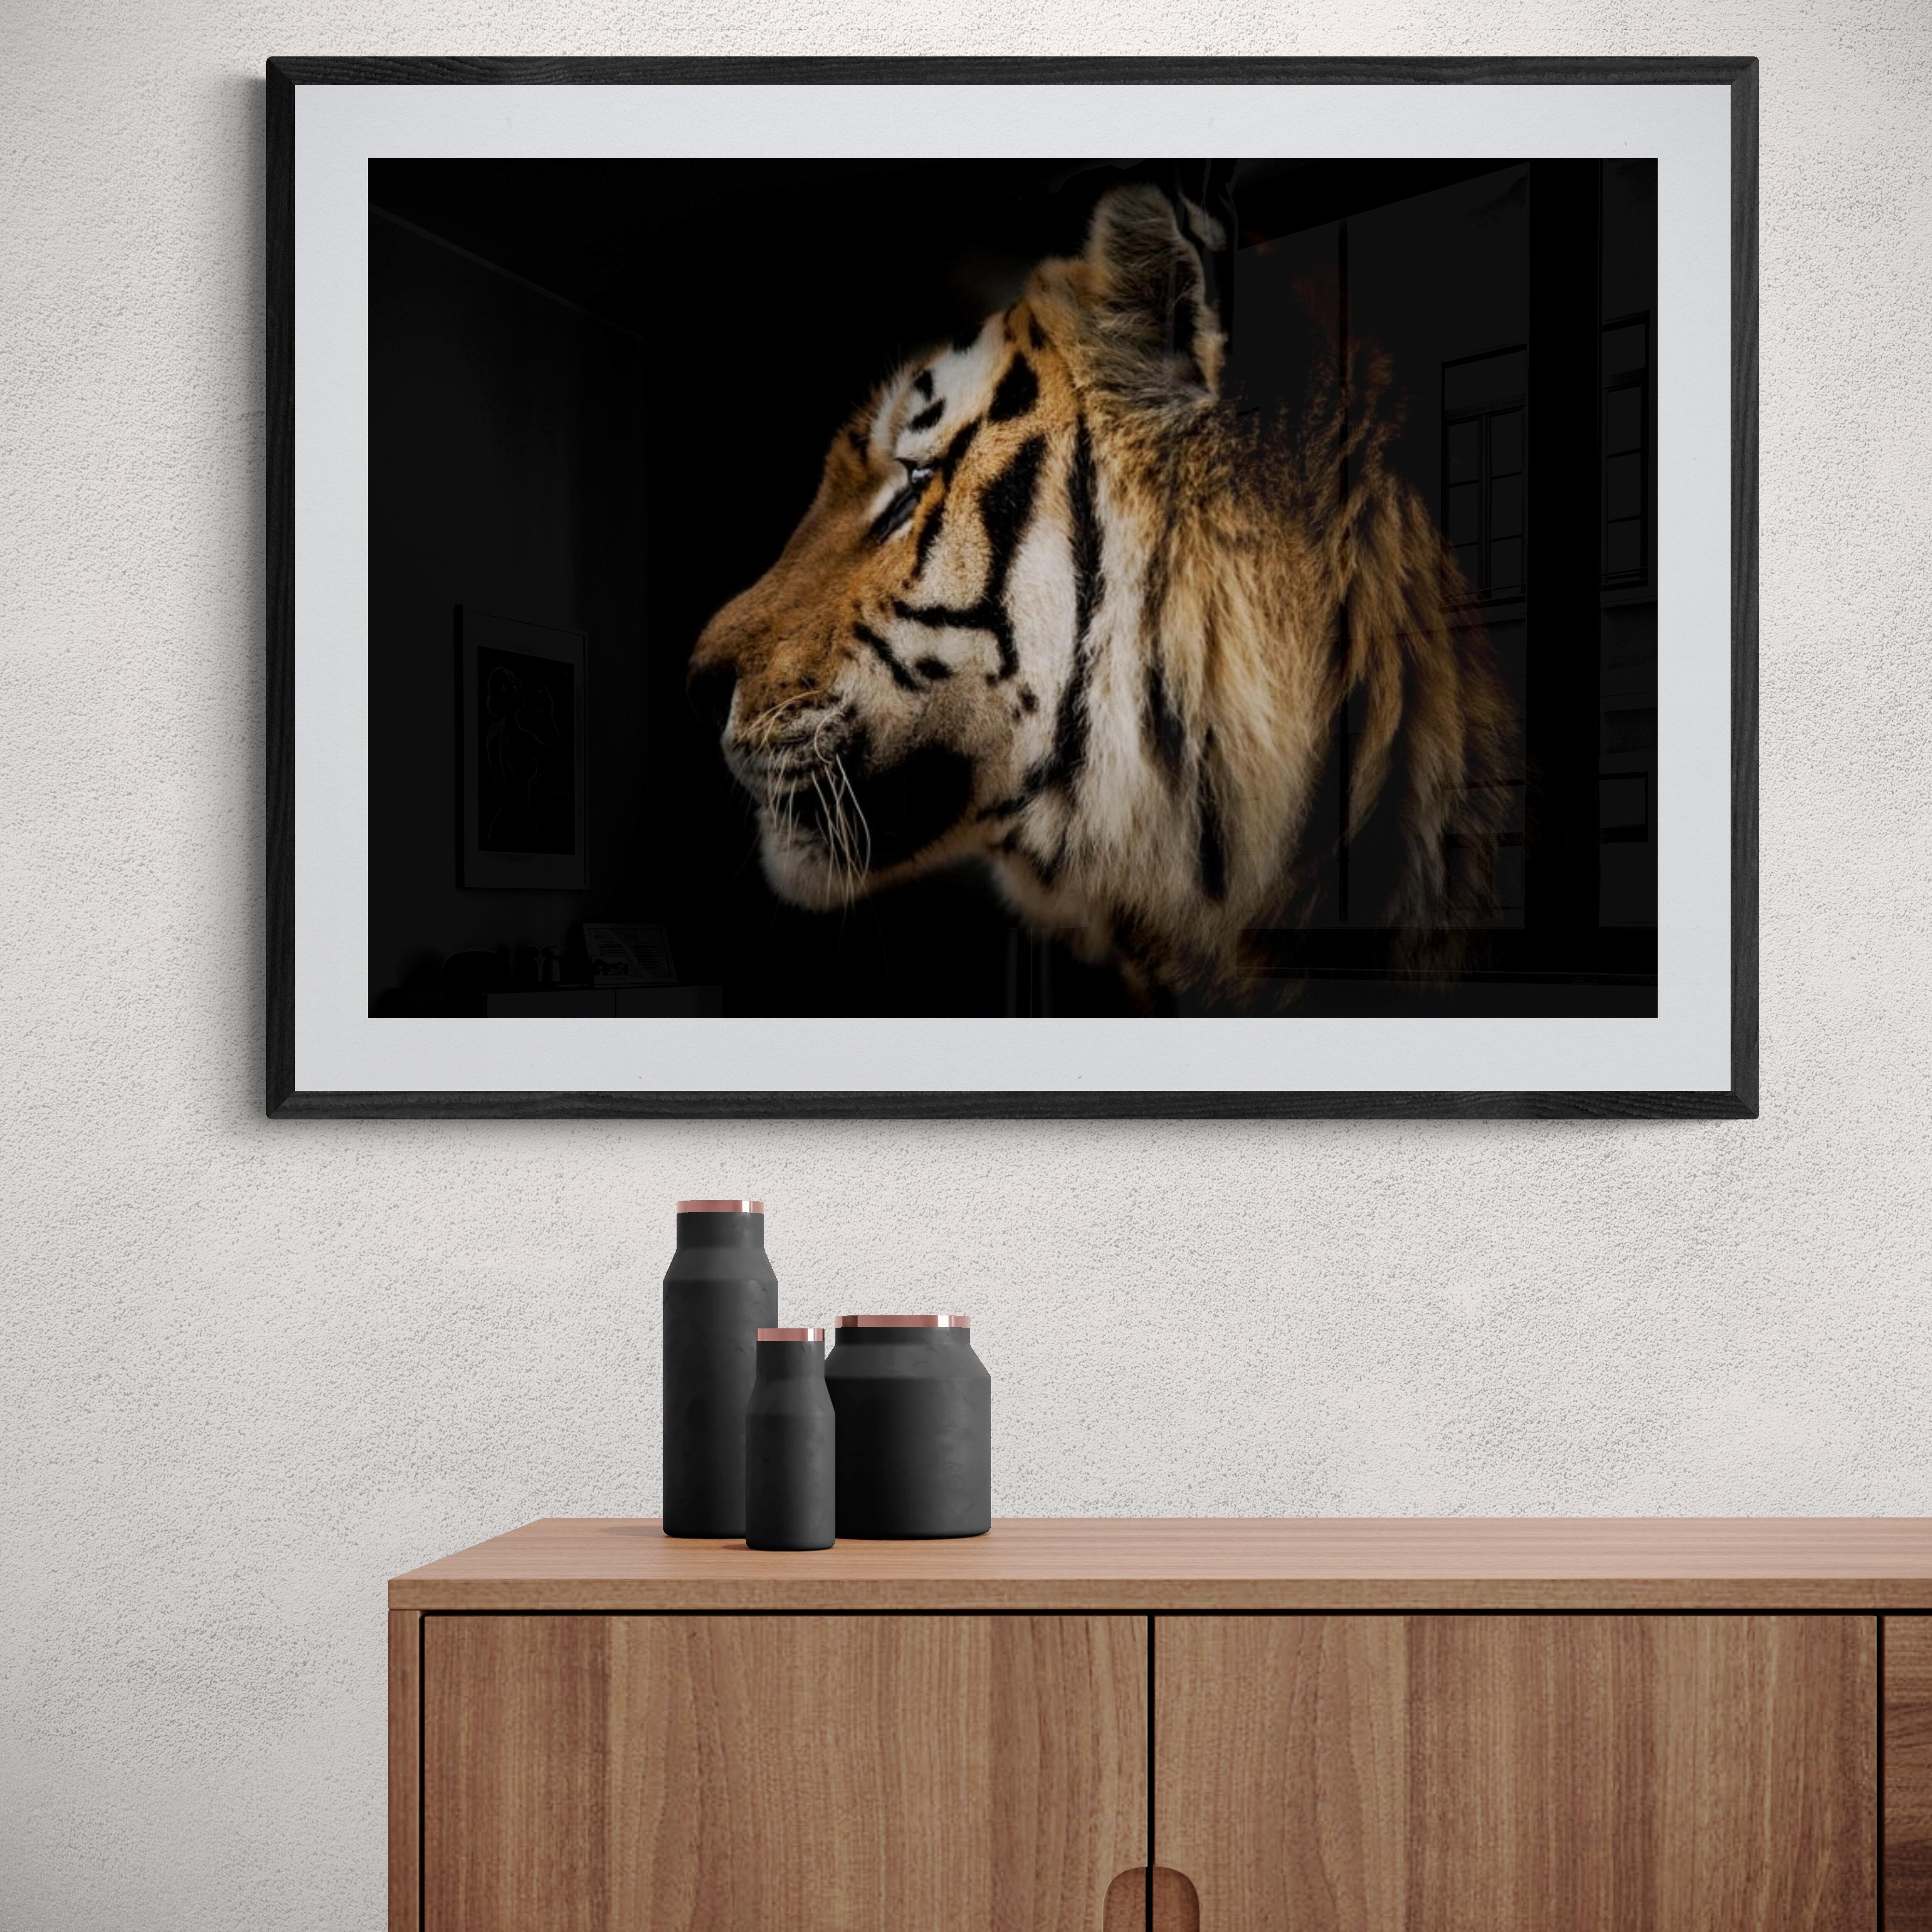 This is a contemporary photograph of a Tiger by Shane Russeck. 
60x40 
Printed on archival paper using archival inks
Unsigned print 

Shane Russeck is a modern day photographer, adventurer, and explorer. He first picked up a camera while training